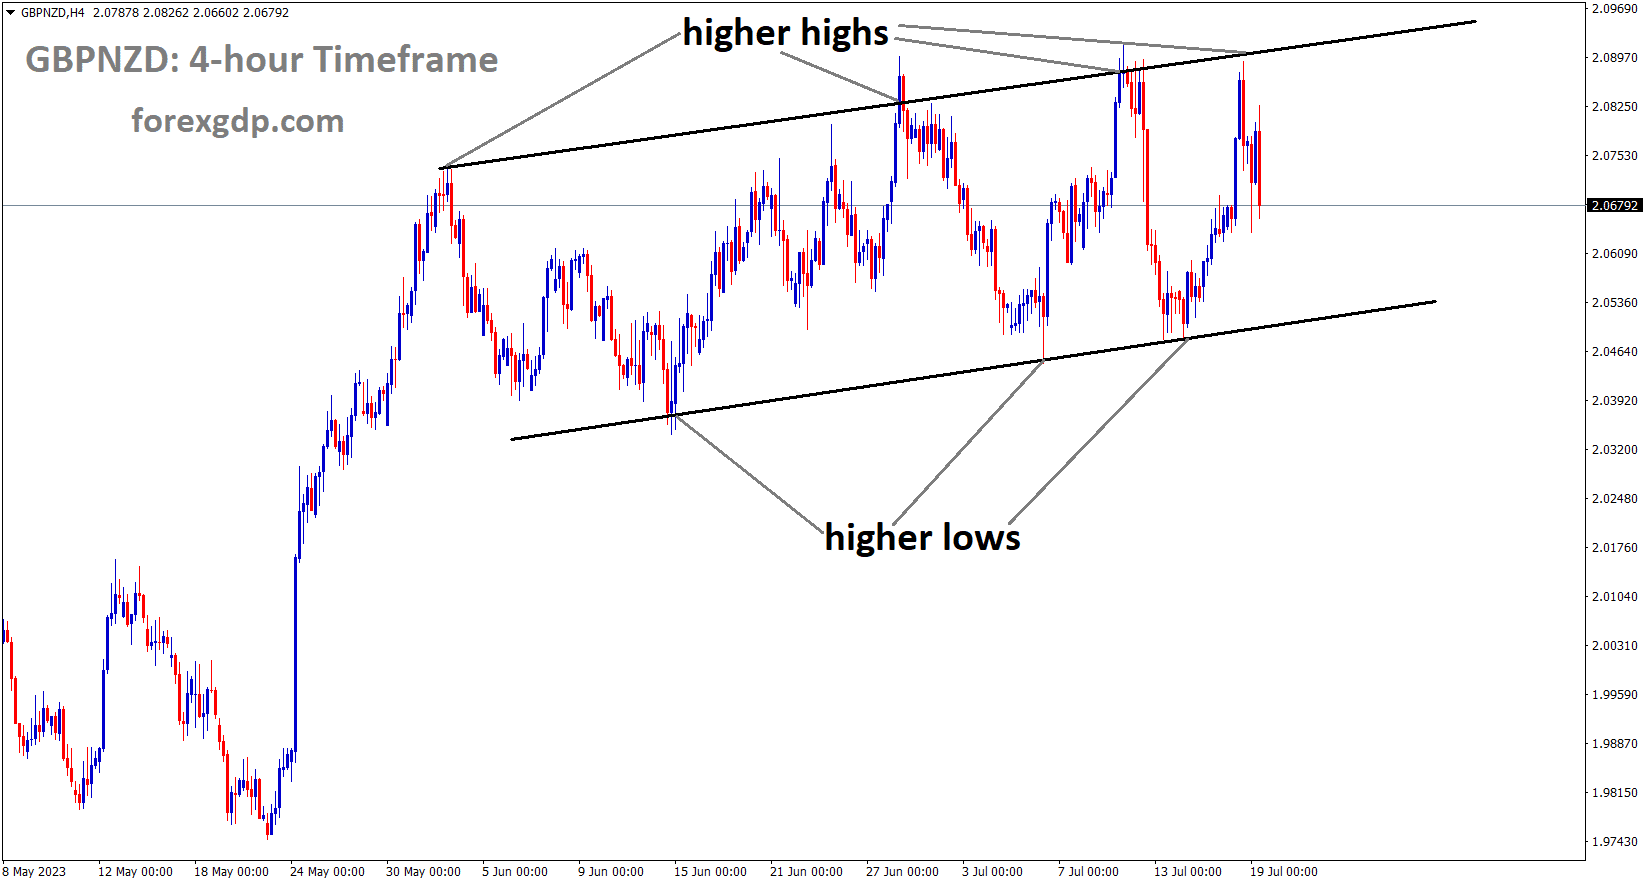 GBPNZD is moving in an Ascending channel and the market has fallen from the higher high area of the channel